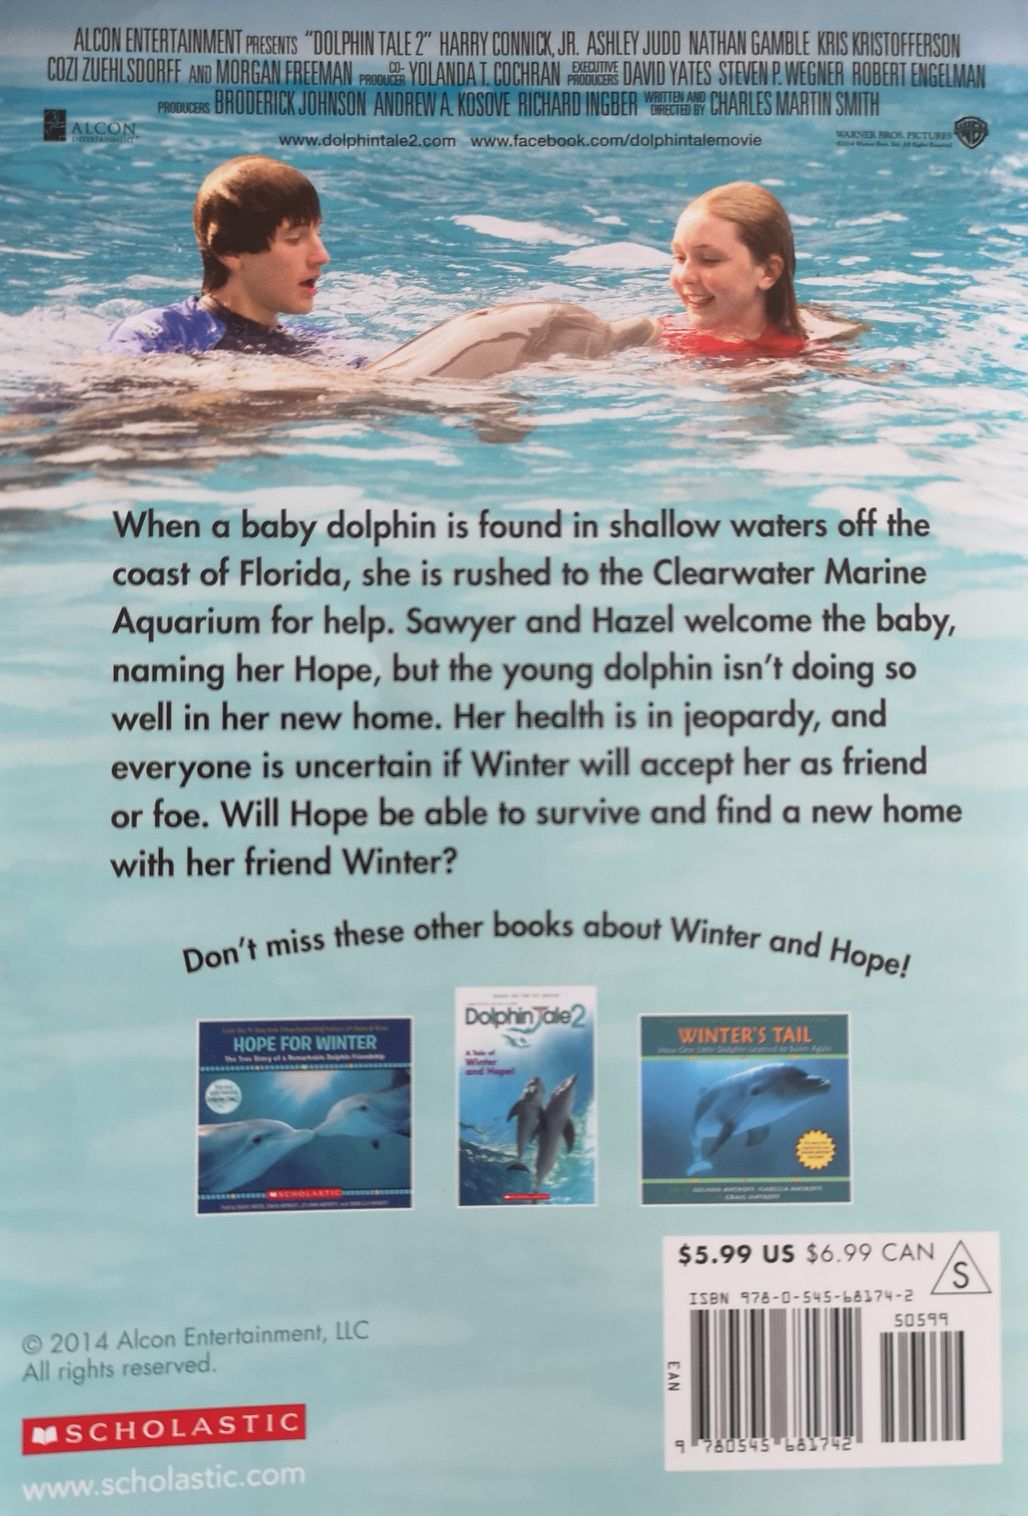 Dolphin Tale 2: The Junior Novel - Gabrielle Reyes (Scholastic Inc. - Paperback) book collectible [Barcode 9780545681742] - Main Image 2